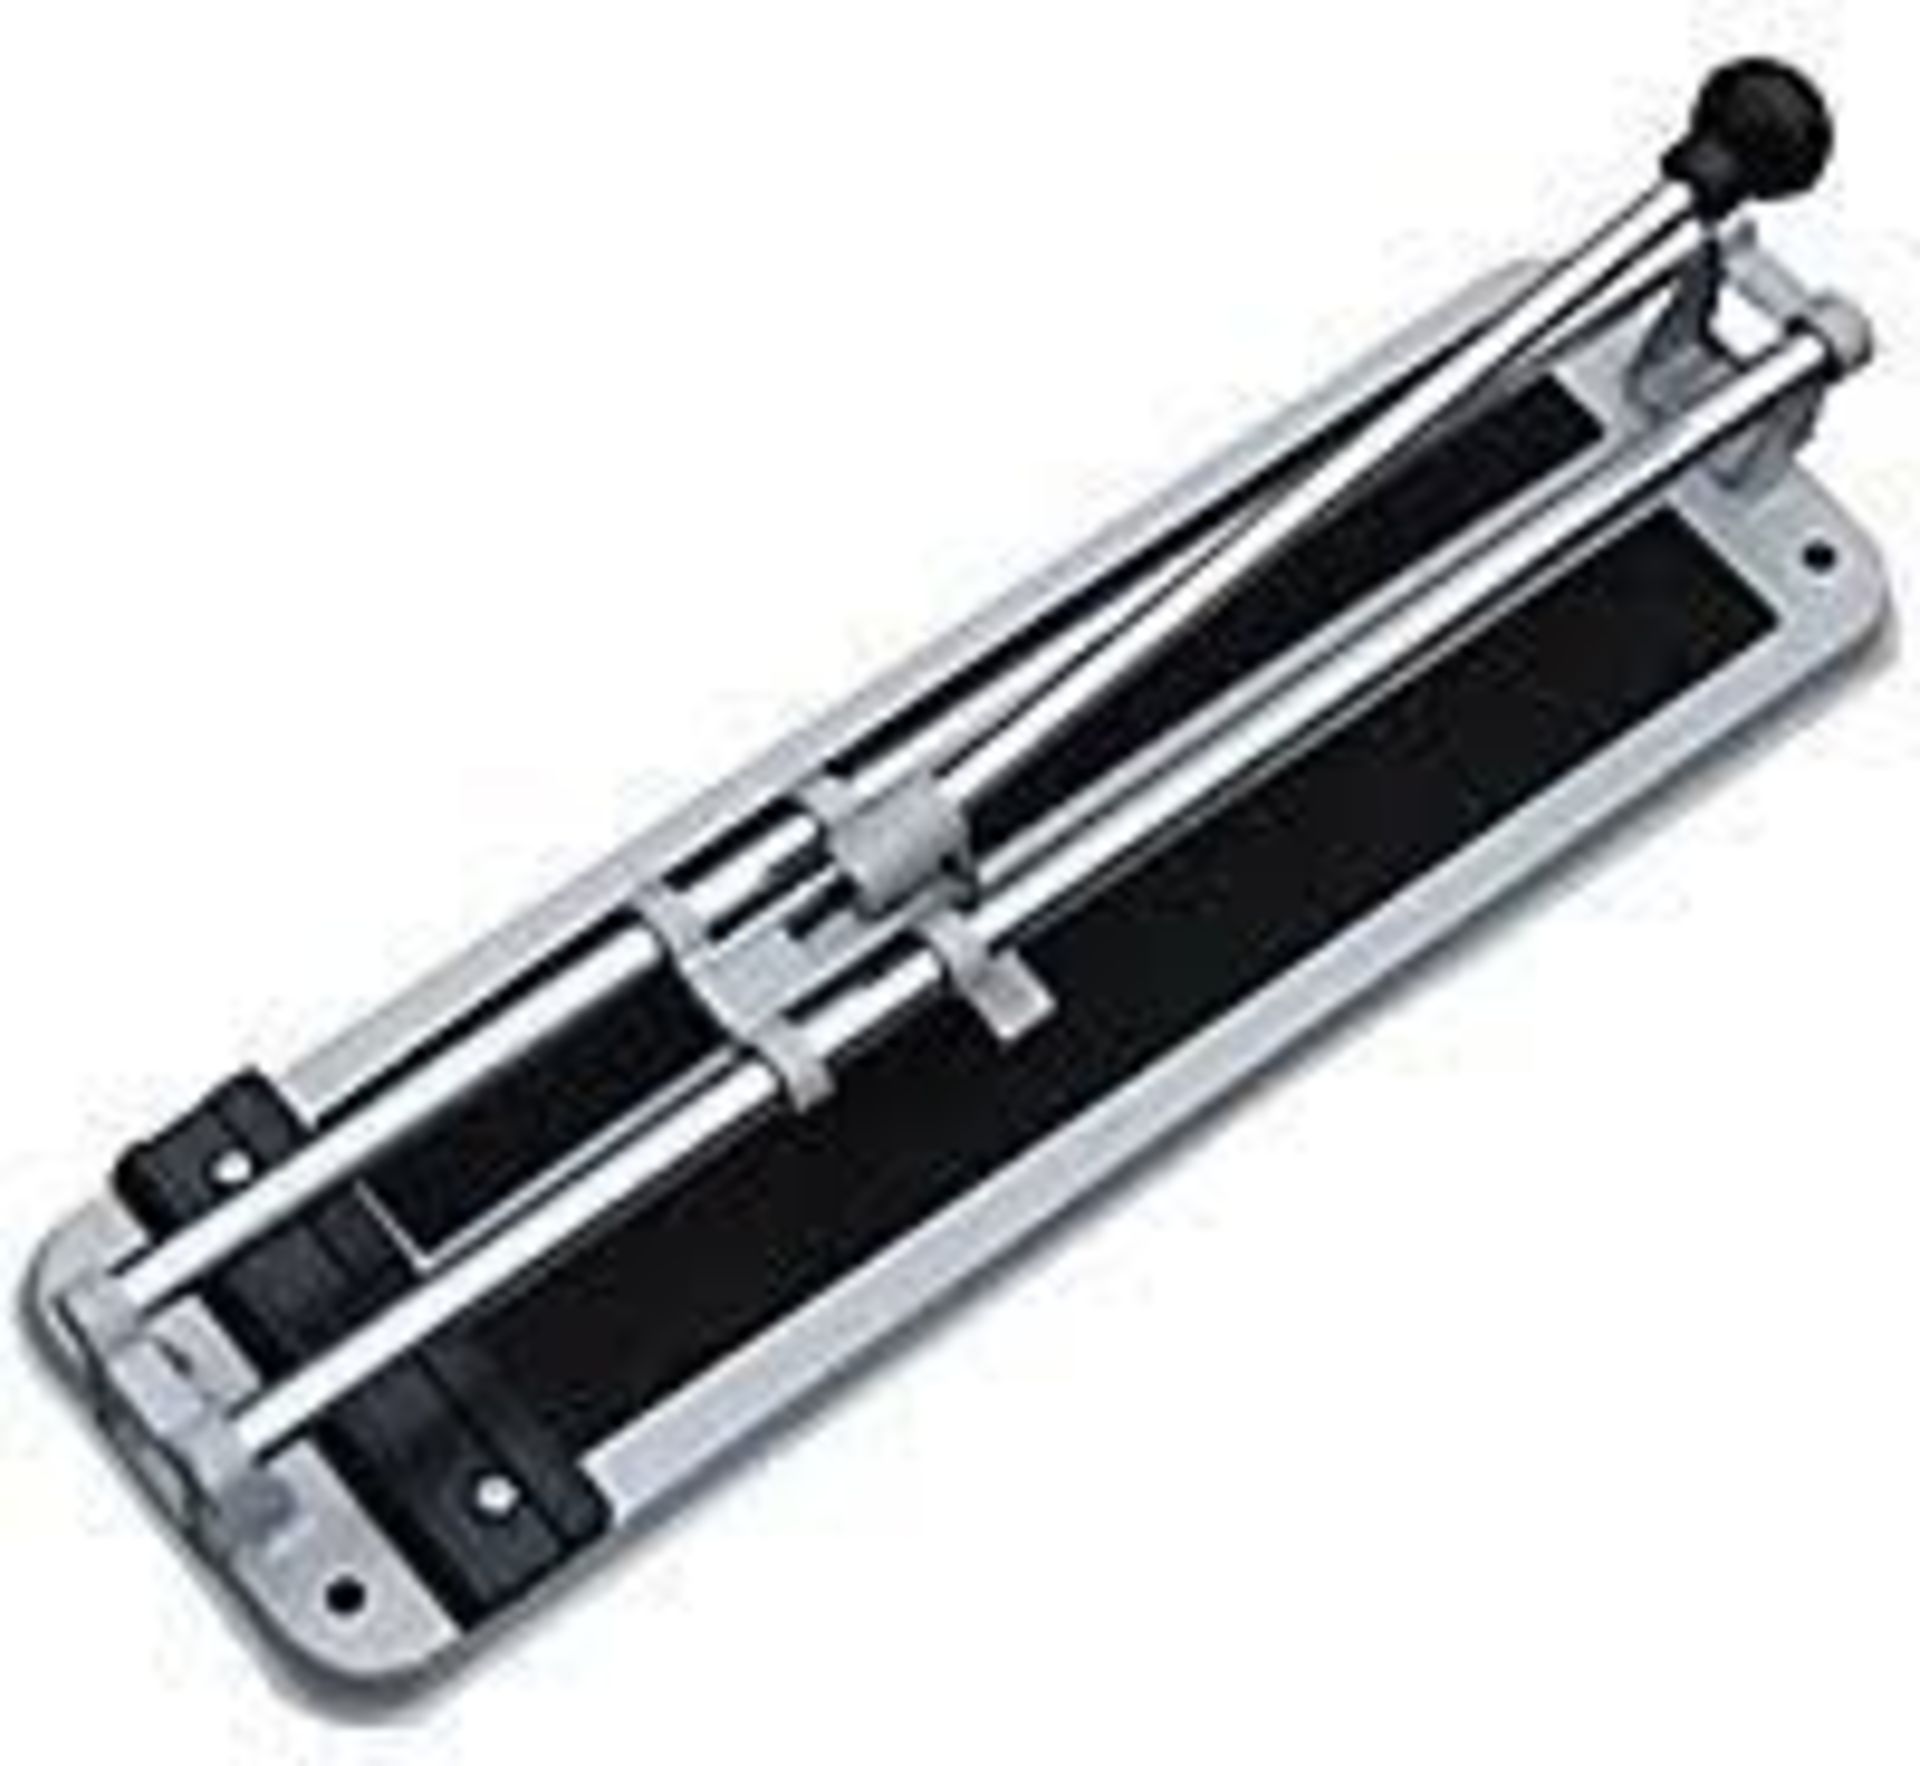 330mm Manual Tile cutter. - R14.13. This Light duty 330mm tungsten carbide tile cutter with it's